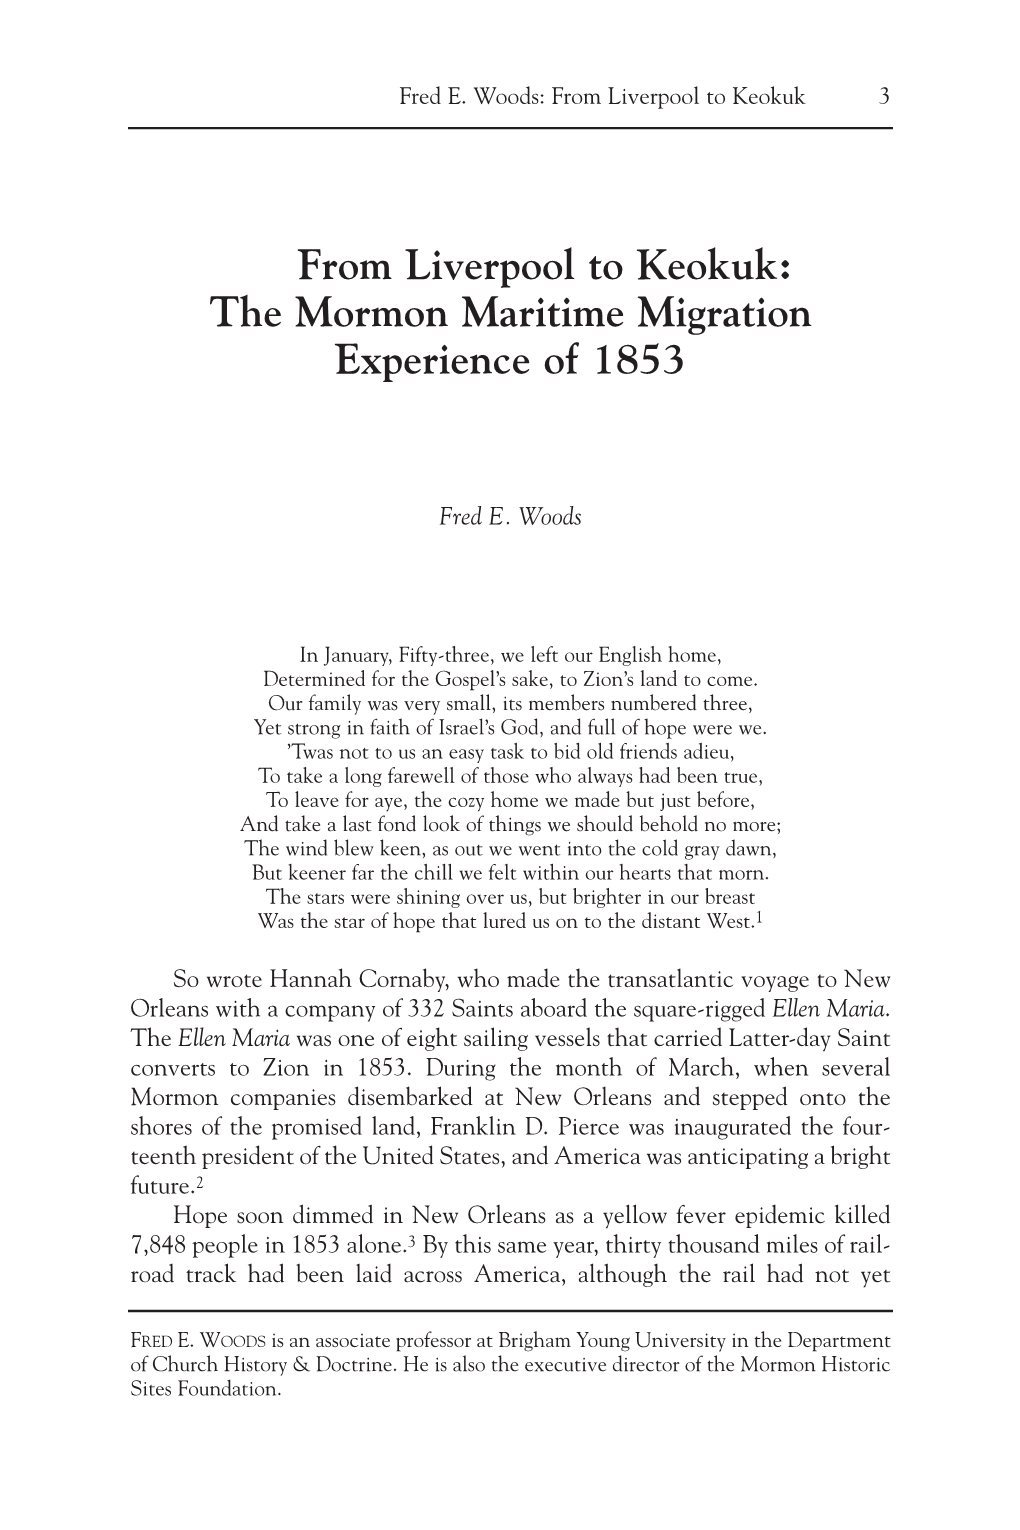 From Liverpool to Keokuk: the Mormon Maritime Migration Experience of 1853